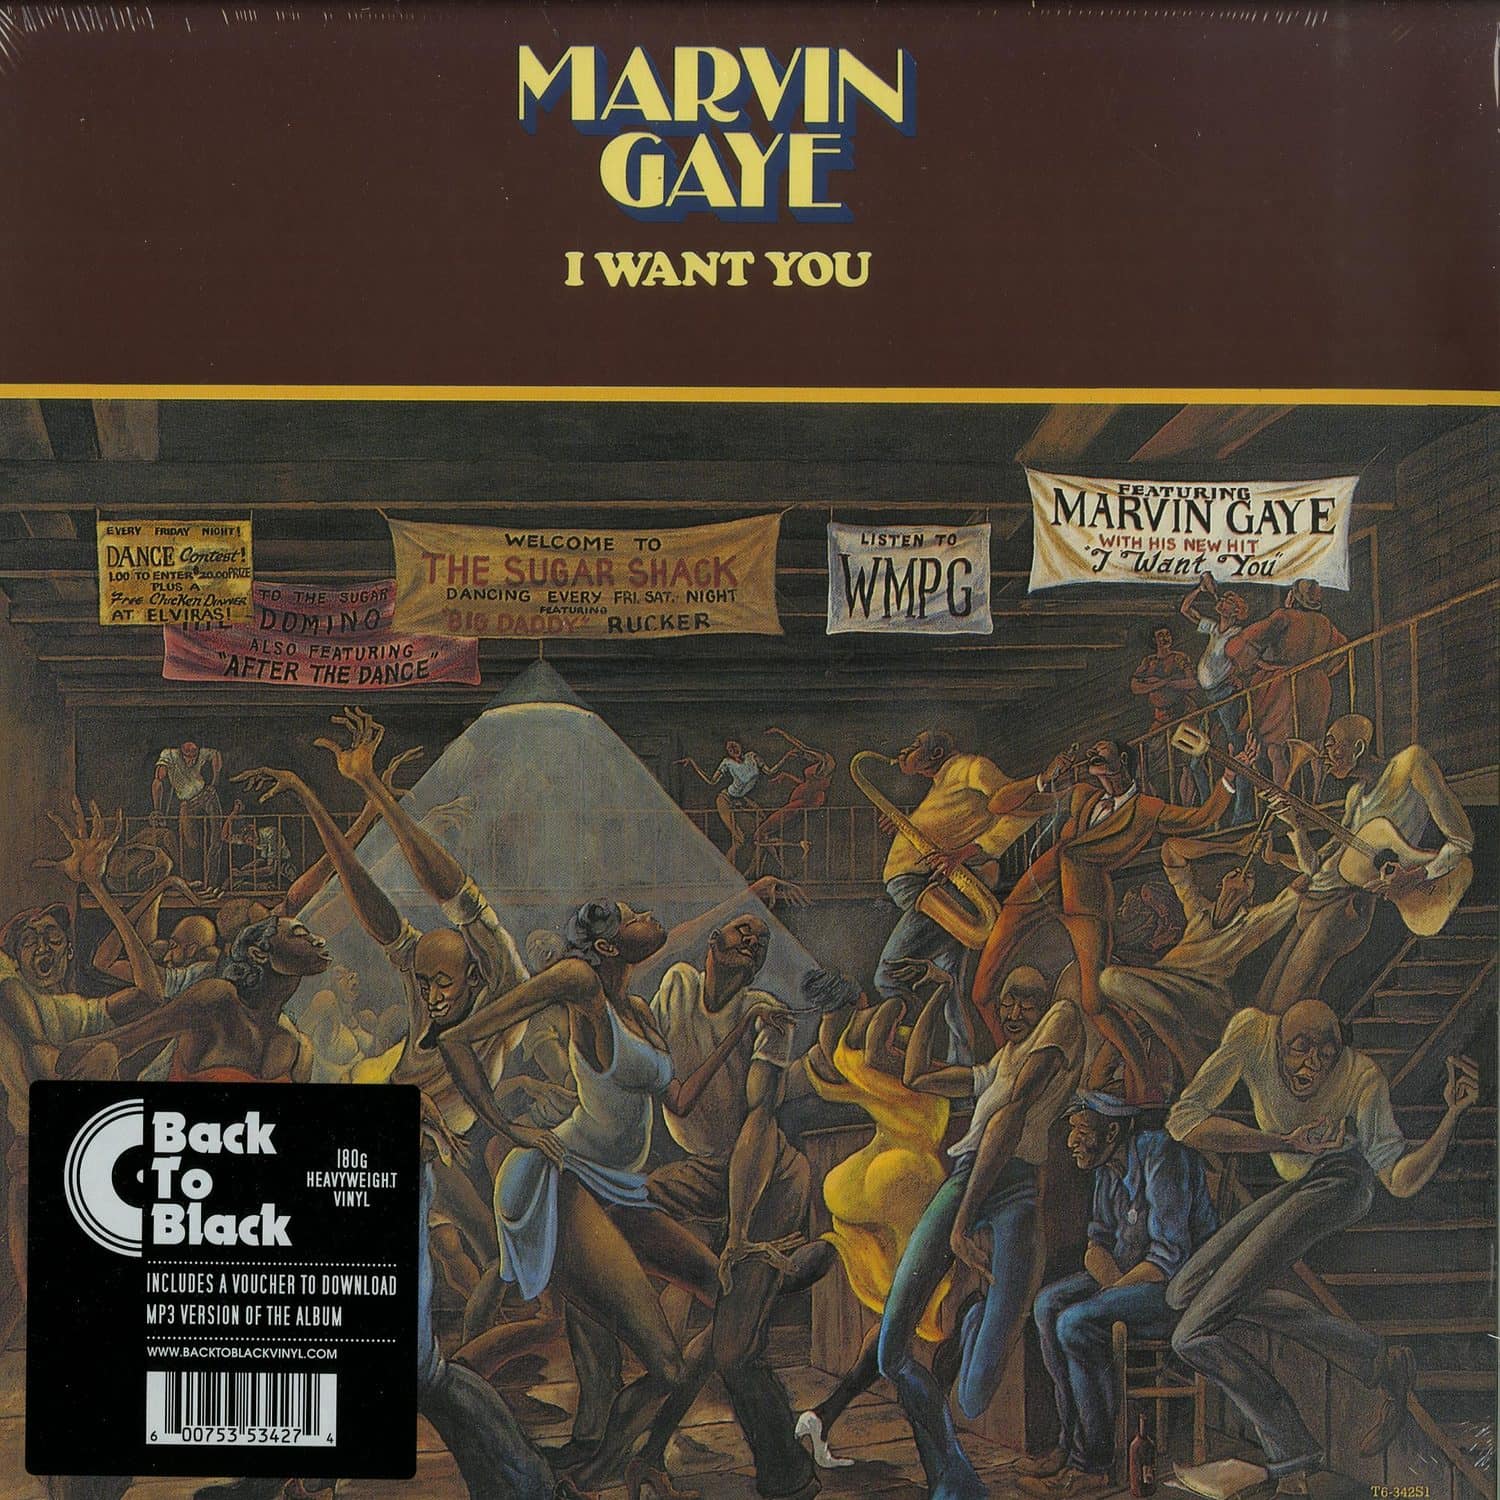 Marvin Gaye - I WANT YOU 